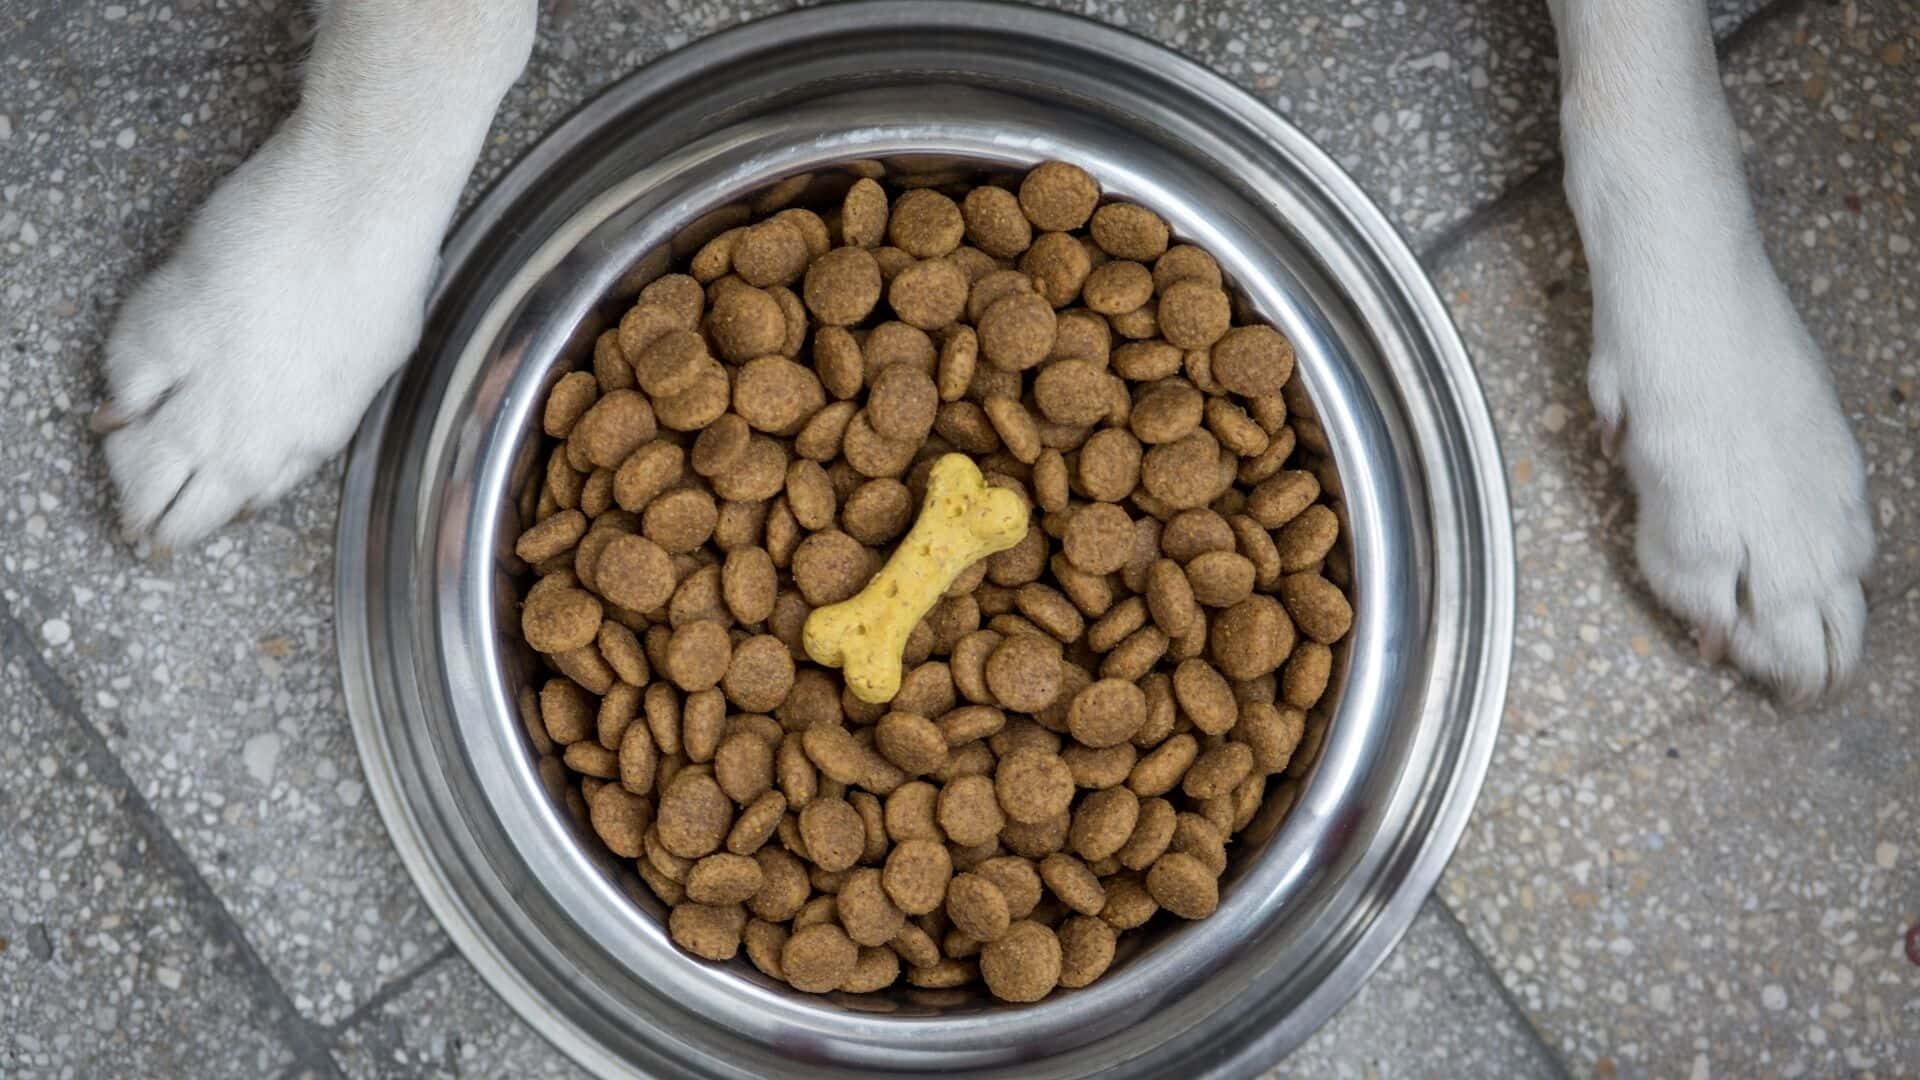 Pros and cons of putting water in dog’s kibble